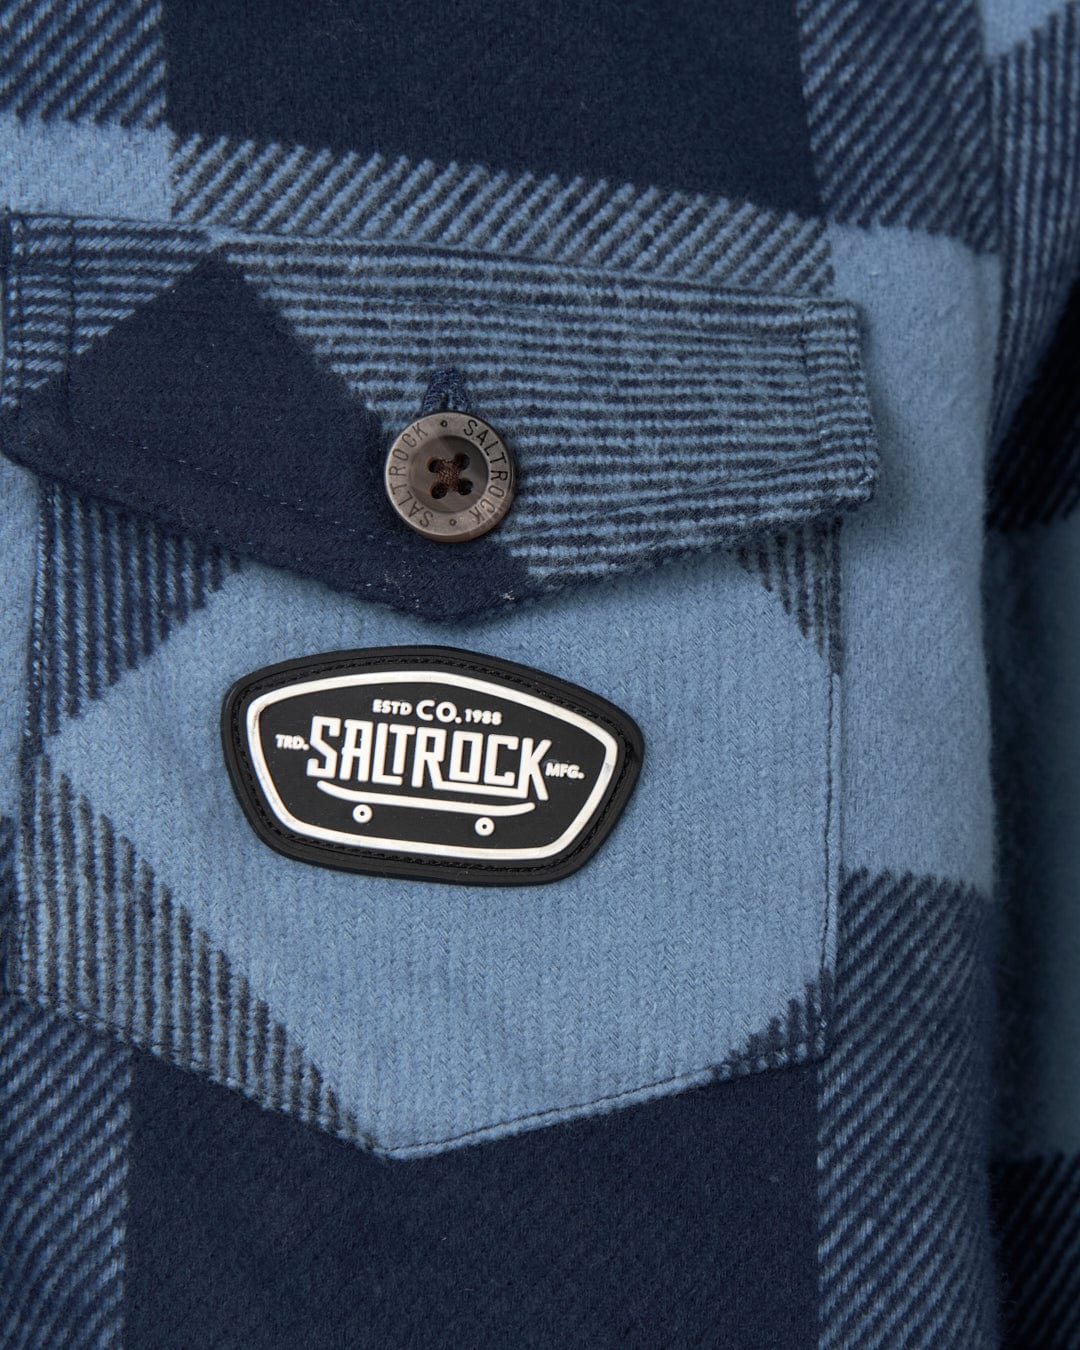 Close-up of a blue and grey plaid Hawkins Hooded Long Sleeve Check Shirt by Saltrock, with front chest pockets, featuring a branded patch and a button on one of the pockets.